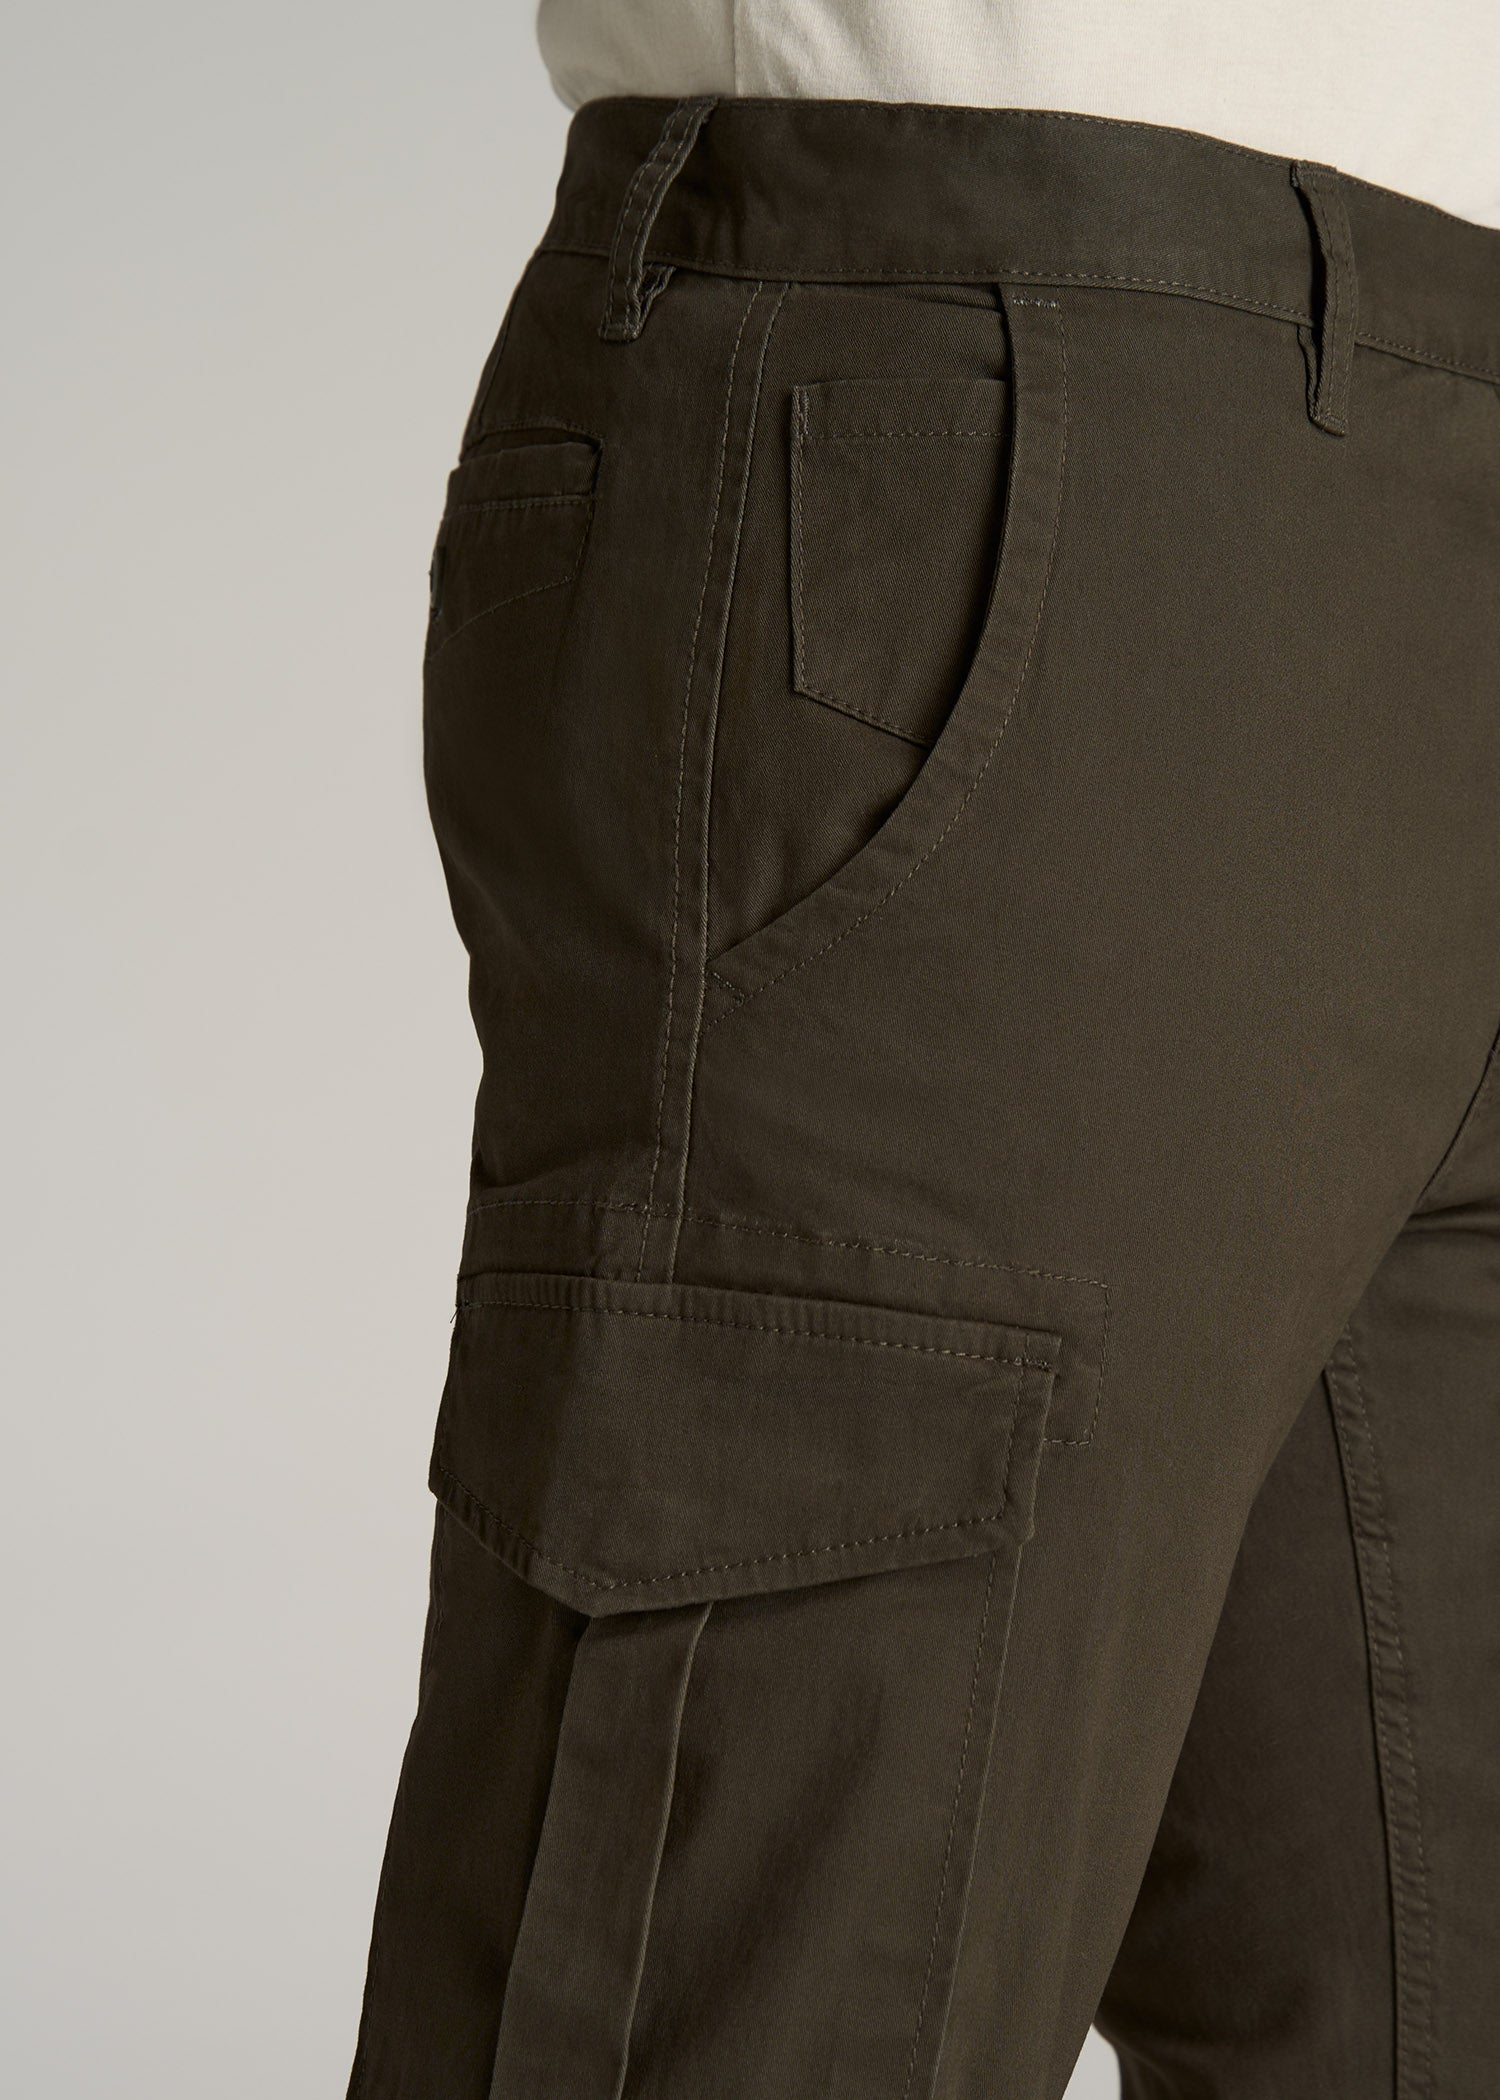 Stretch Twill SLIM-FIT Cargo Pants for Tall Men in Marine Navy